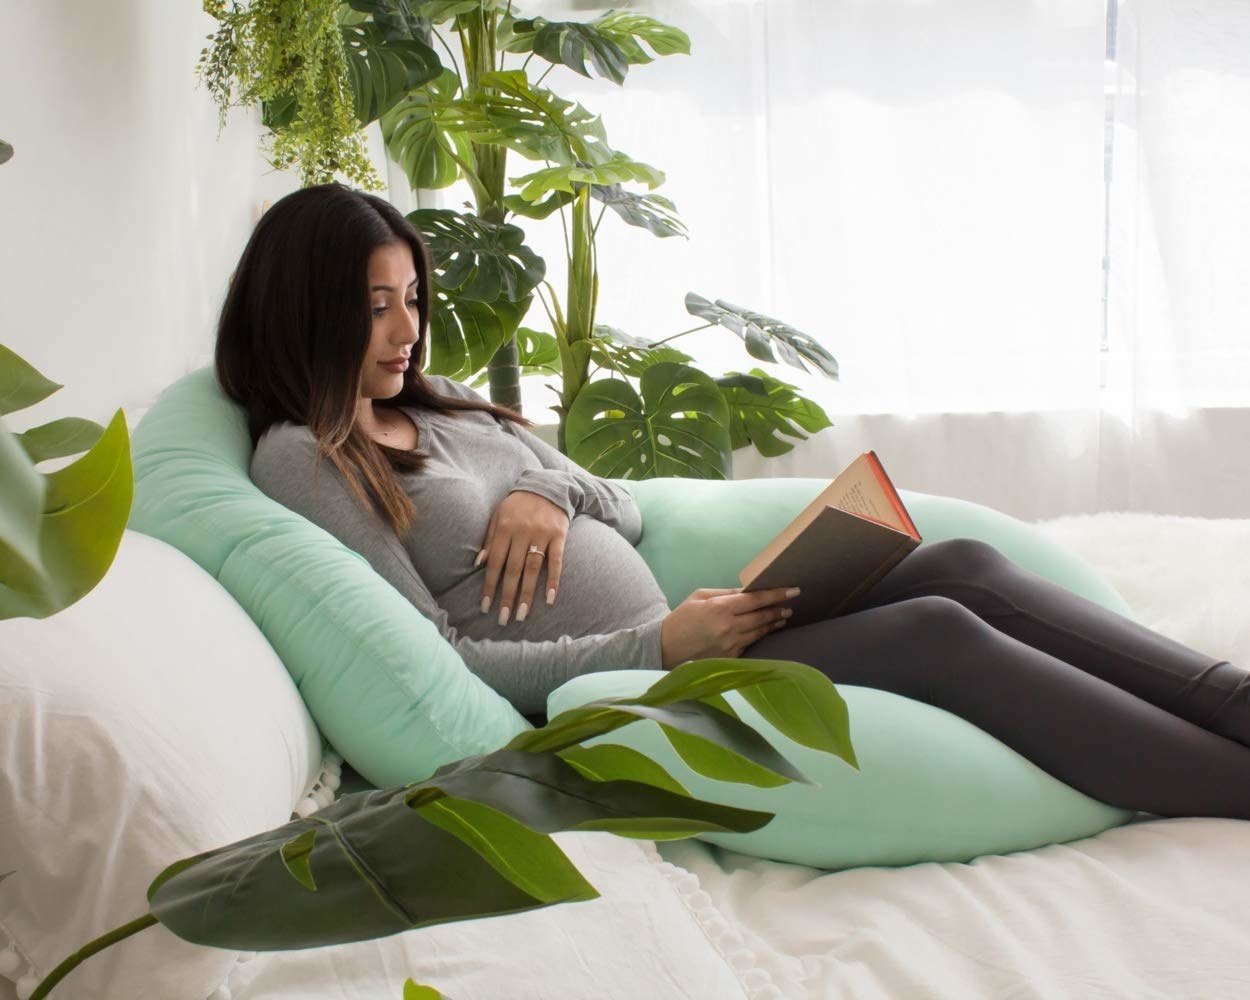 Pregnant person reading book in bed propping back and legs up with large c-shaped pillow 